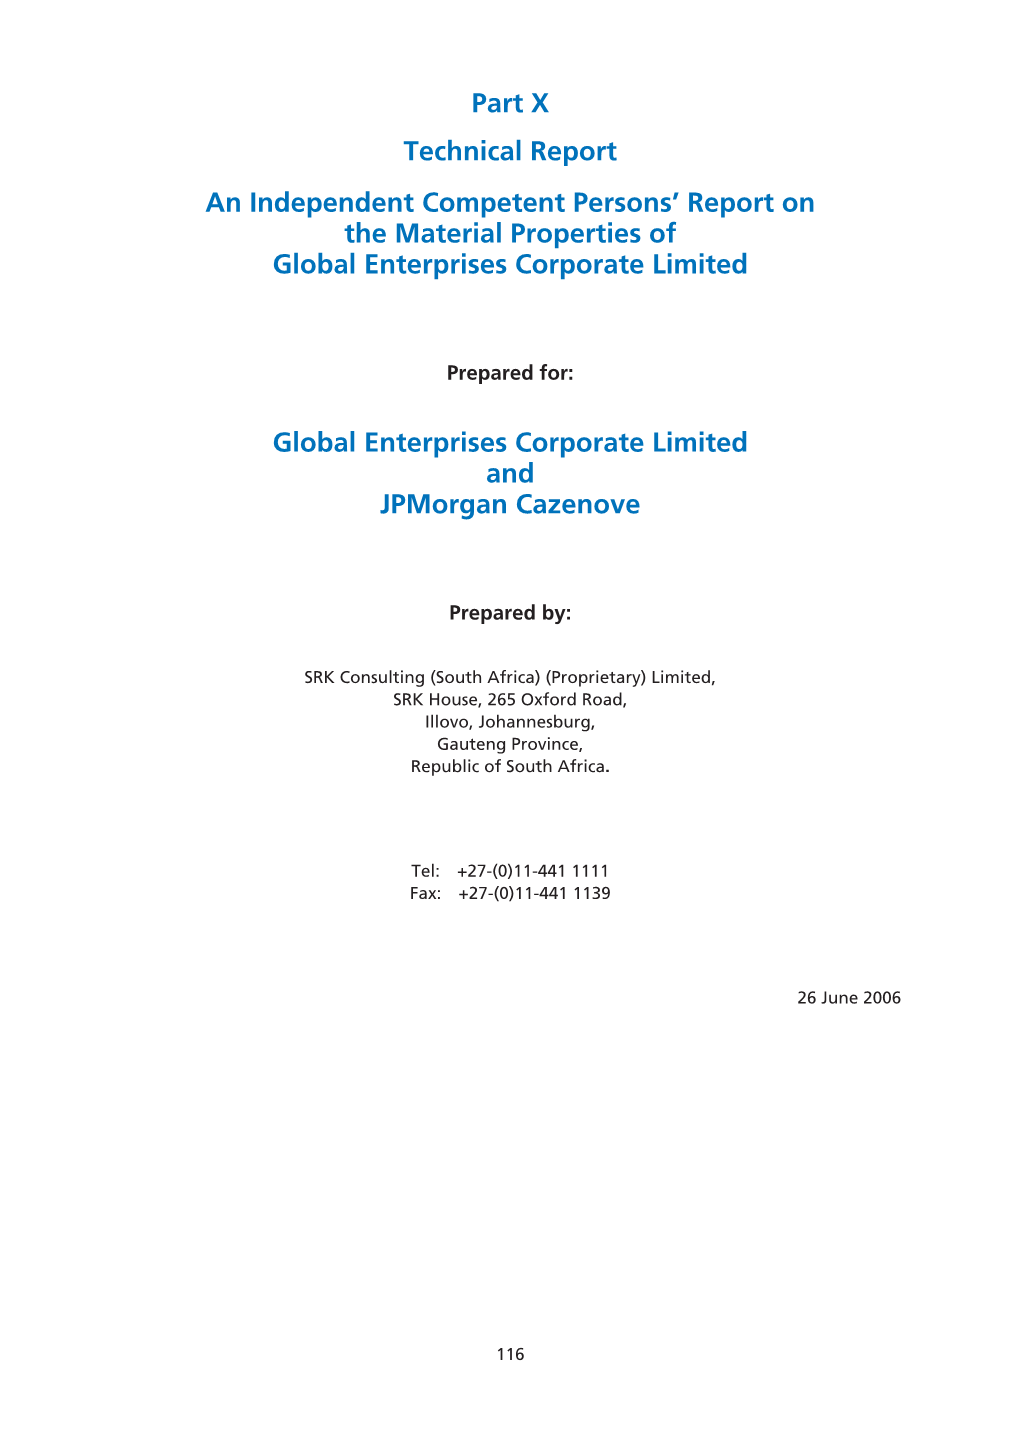 Part X Technical Report an Independent Competent Persons’ Report on the Material Properties of Global Enterprises Corporate Limited